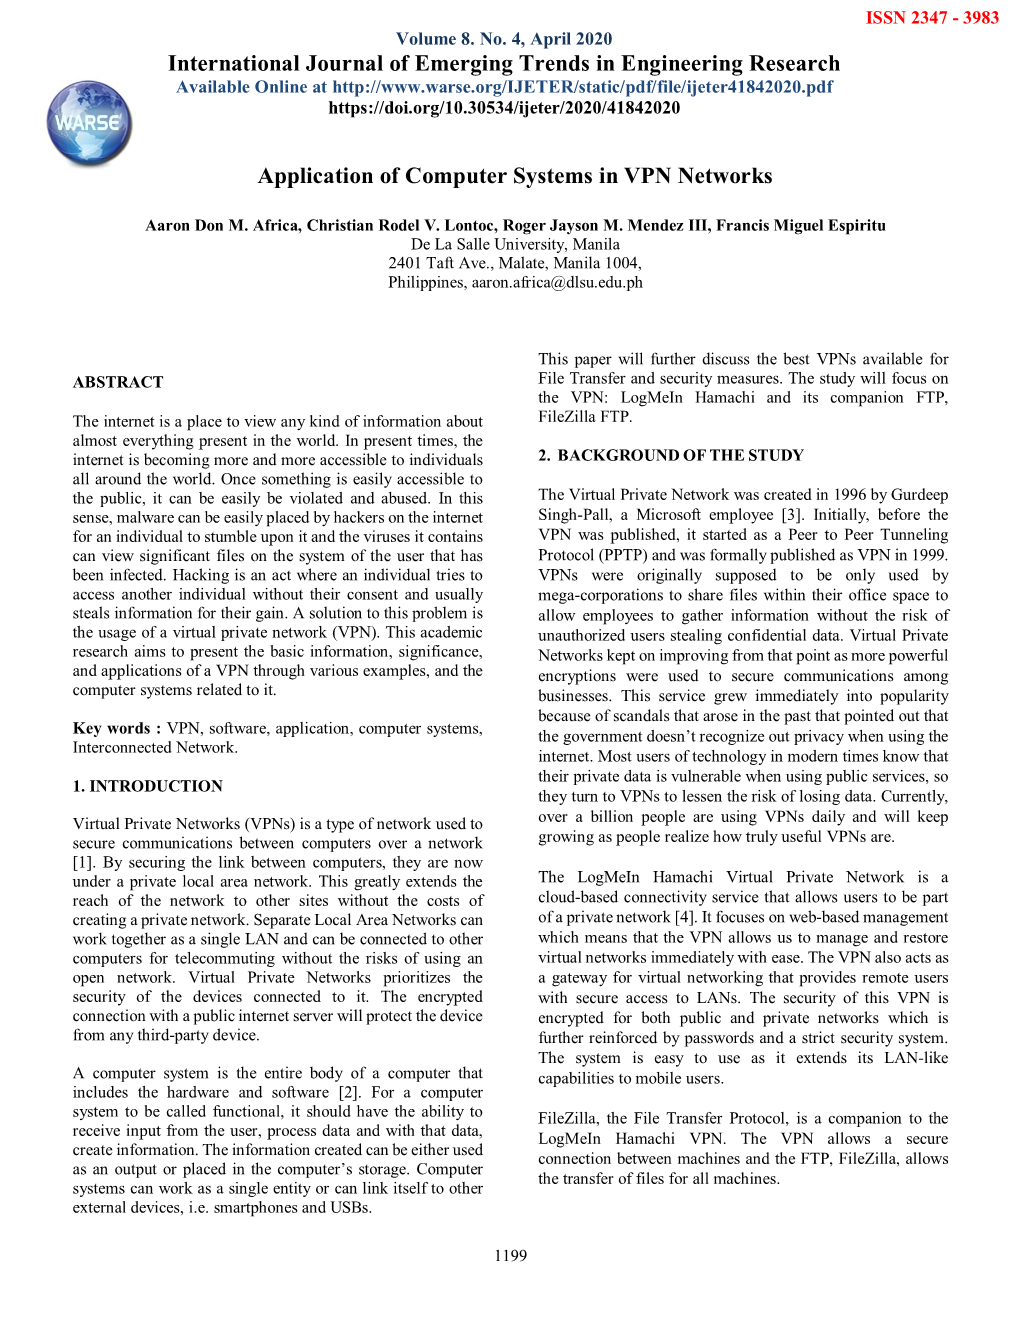 Application of Computer Systems in VPN Networks International Journal